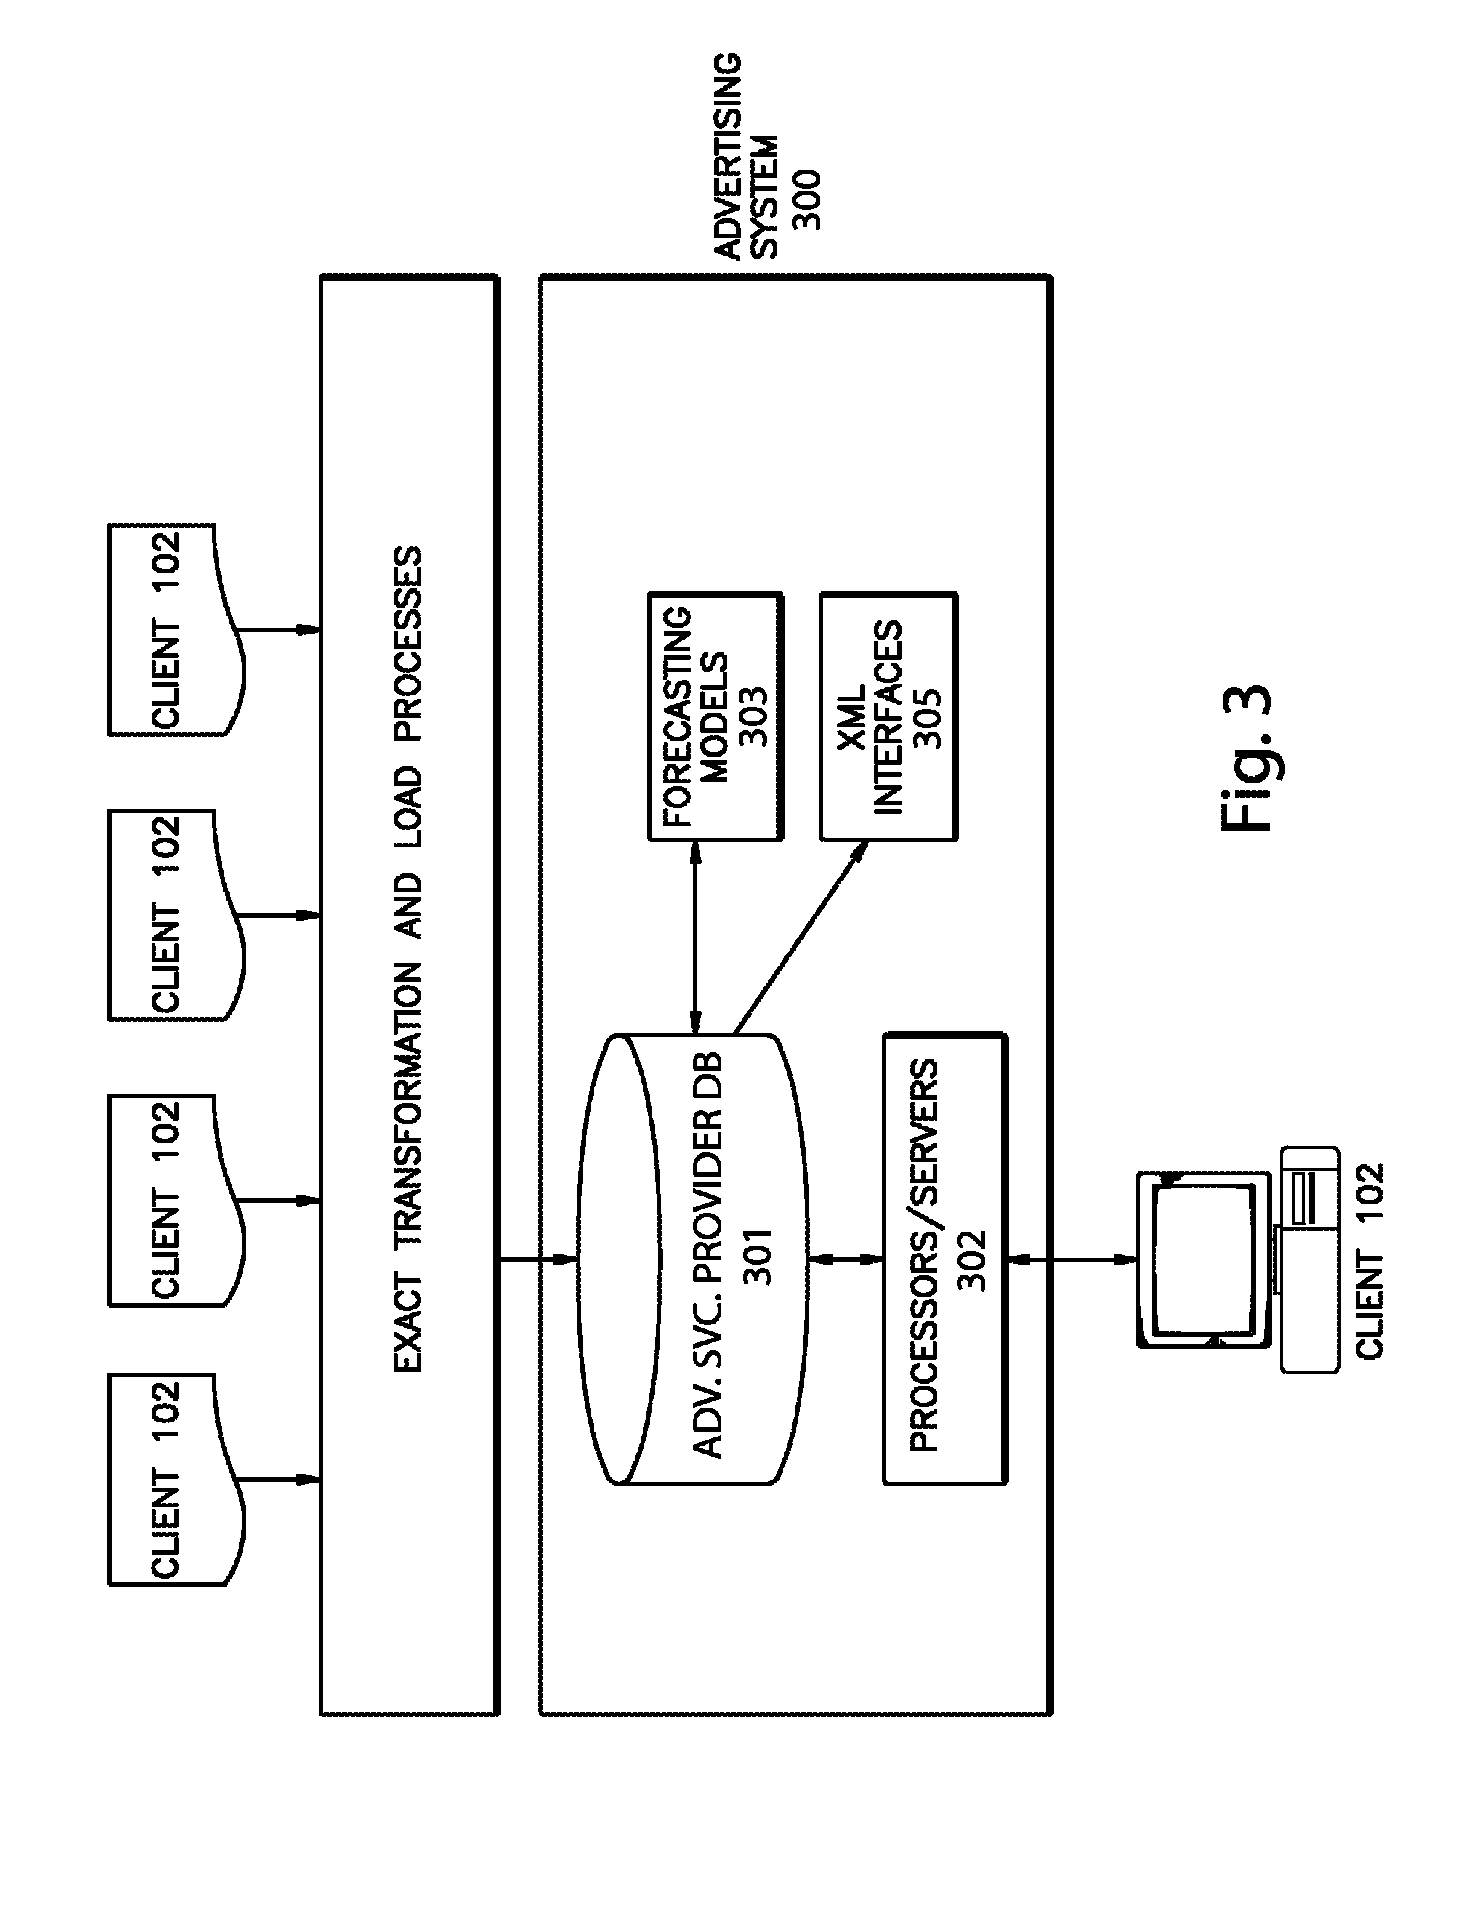 System and method for aggregating advertising pricing data